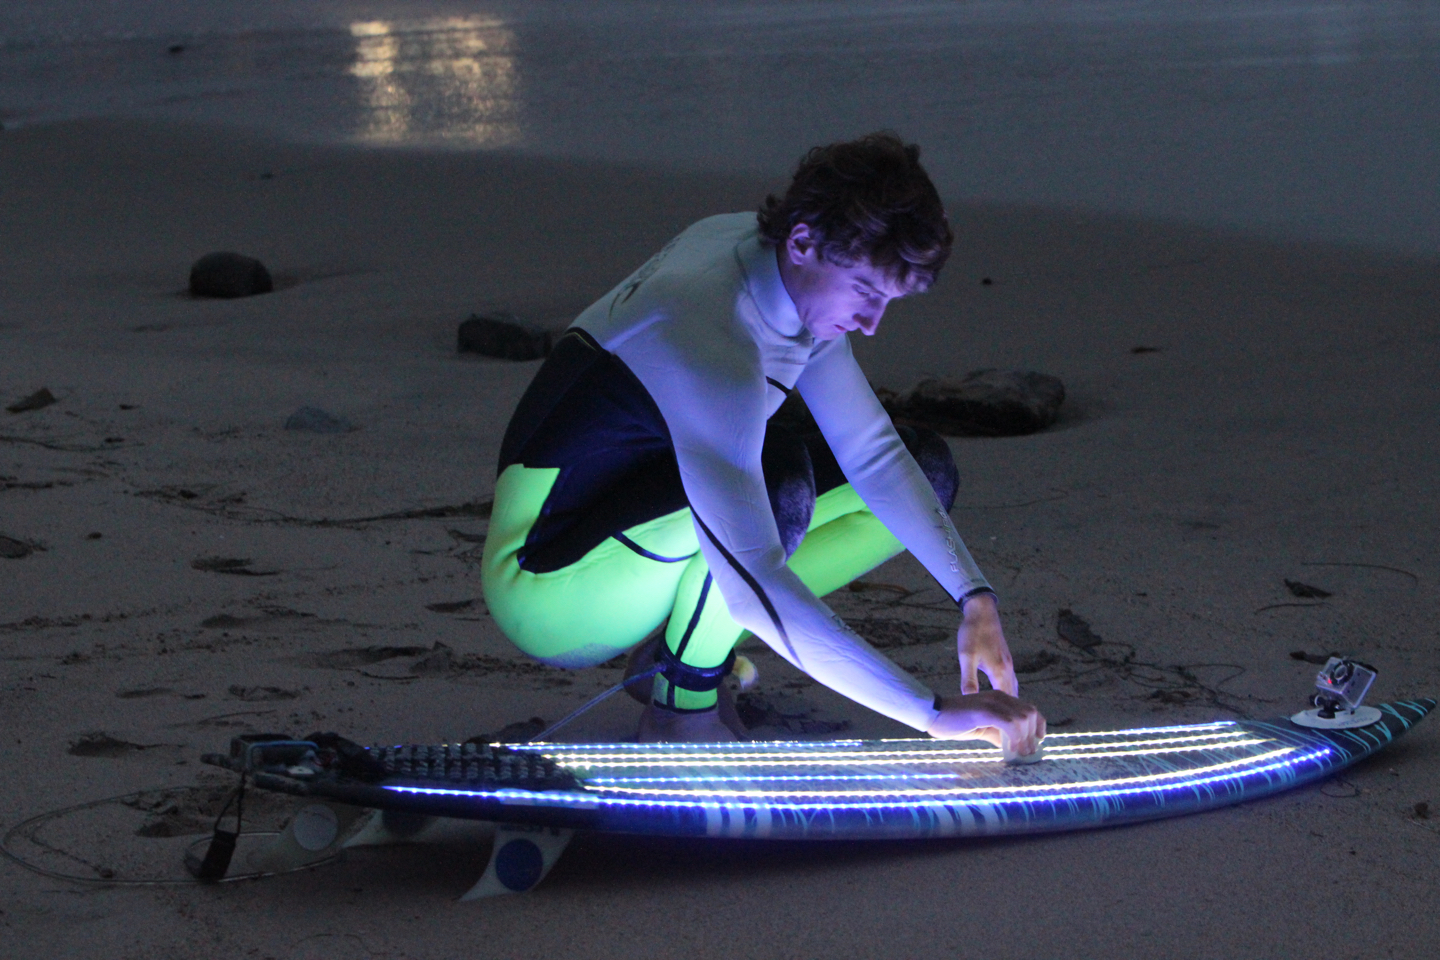 LED-equipped surfboards